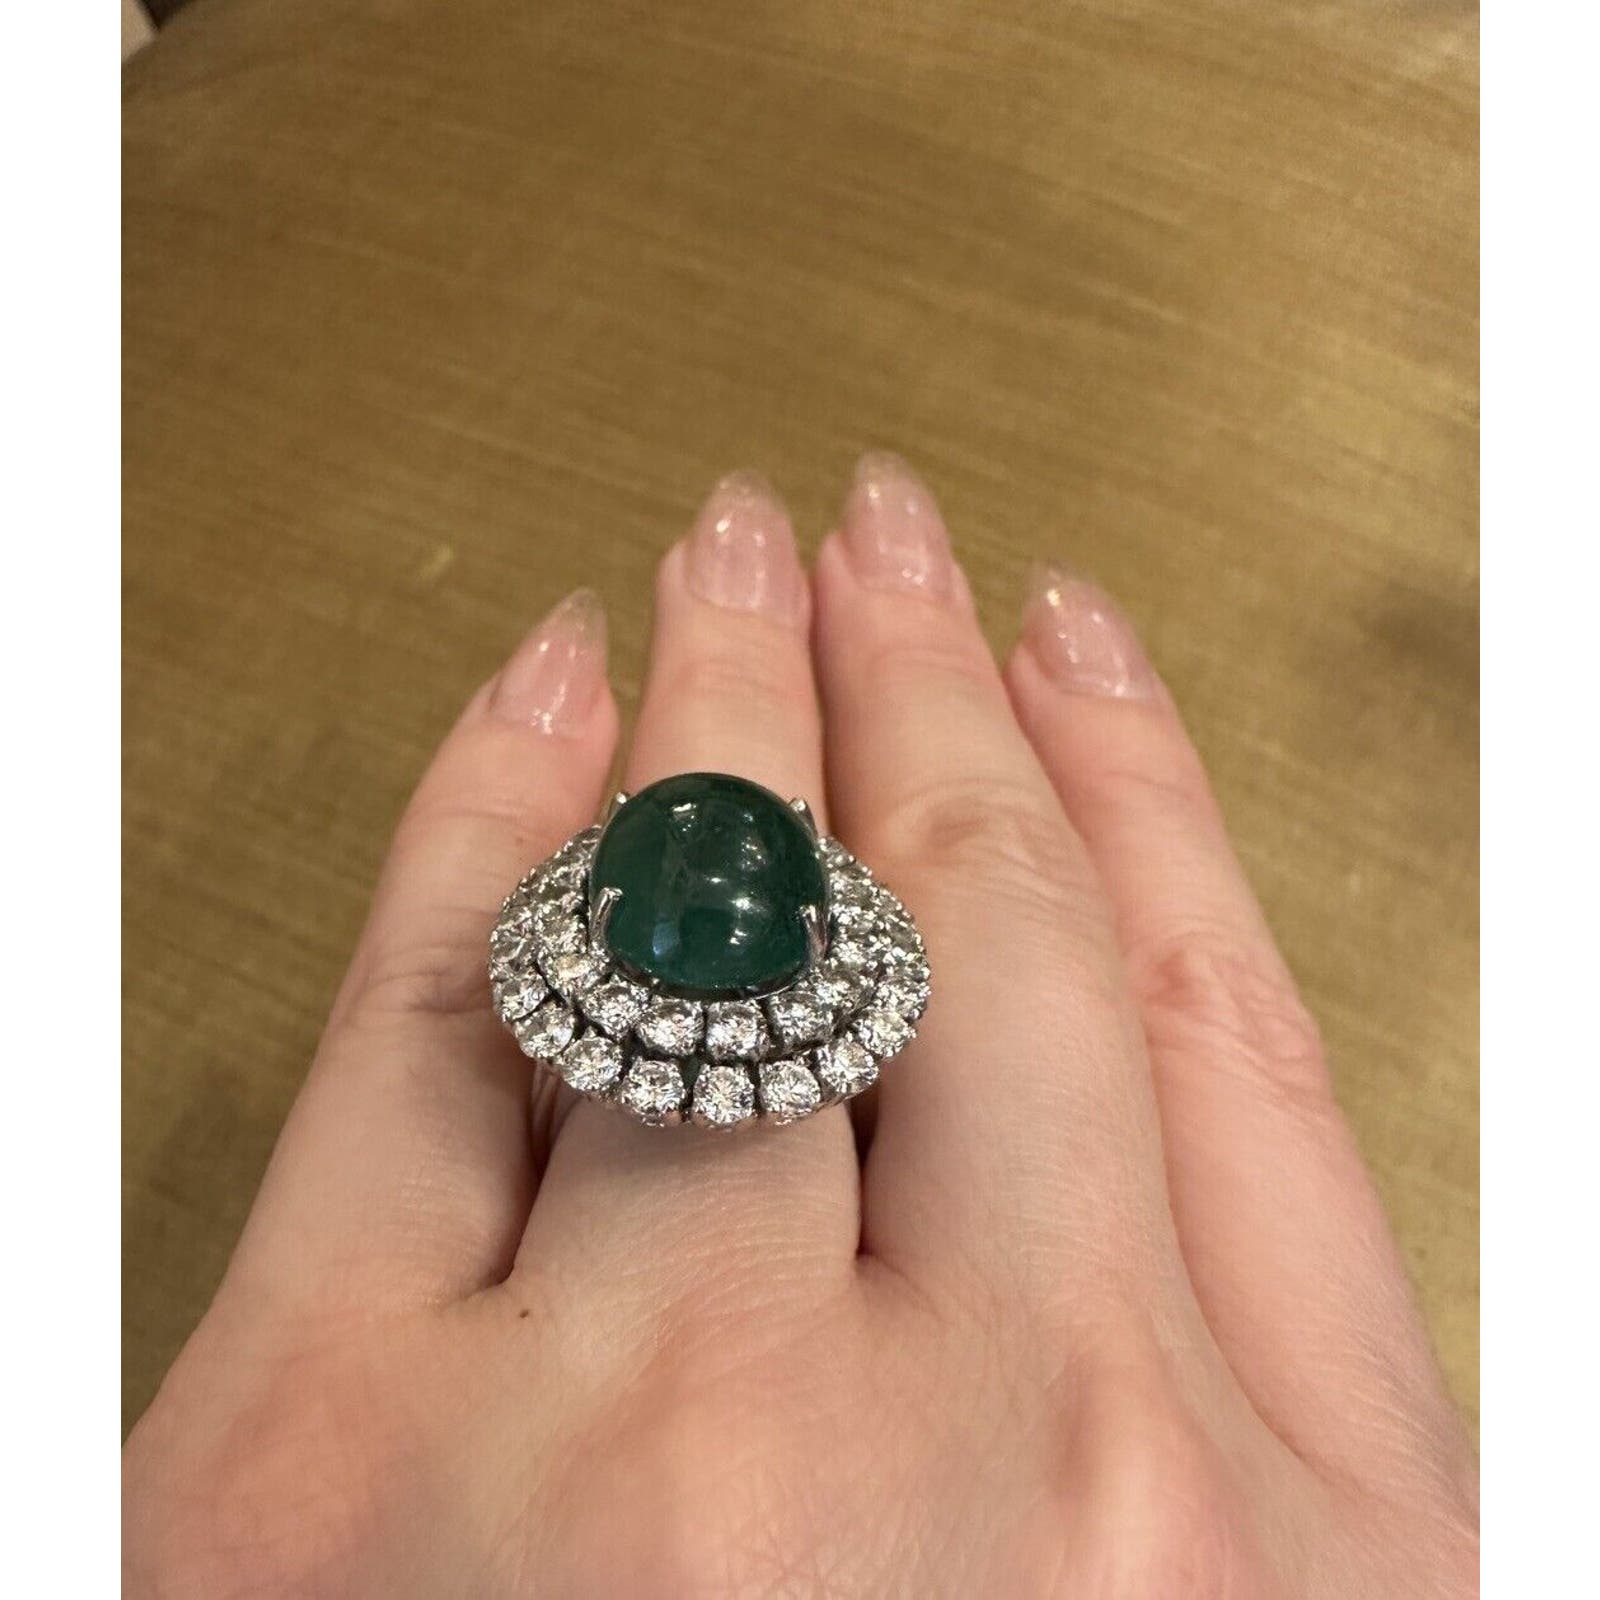 GIA 11.67 ct Natural Emerald Cabochon & Diamond Ring in 18k White Gold - HM2402